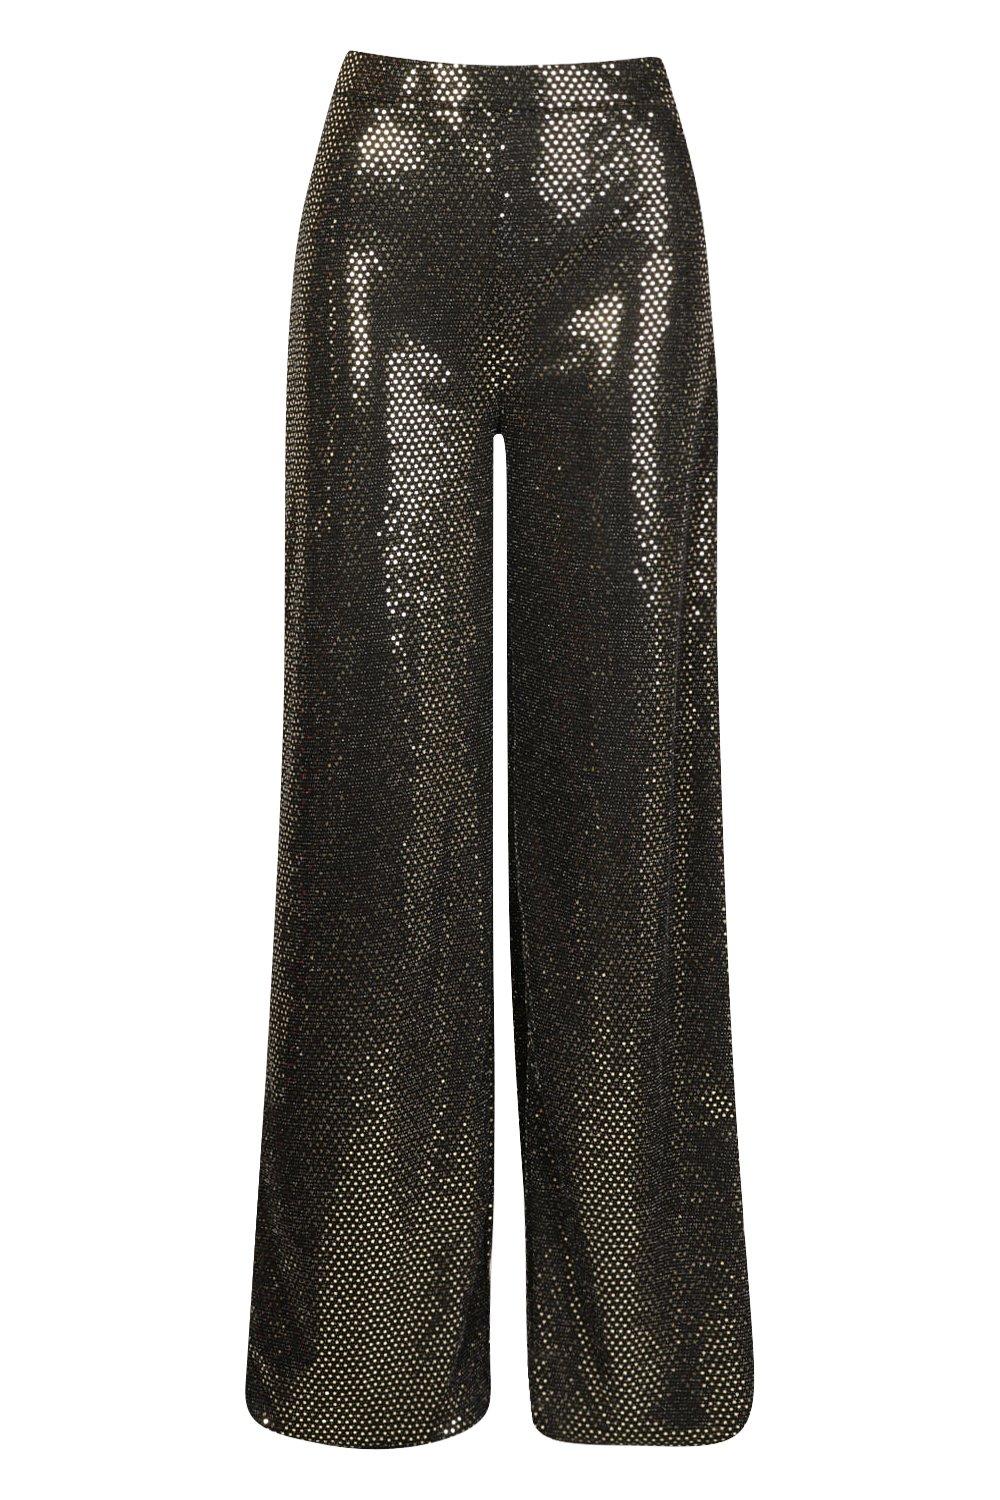 Wide-leg Sequined Pants - Gold-colored - Ladies